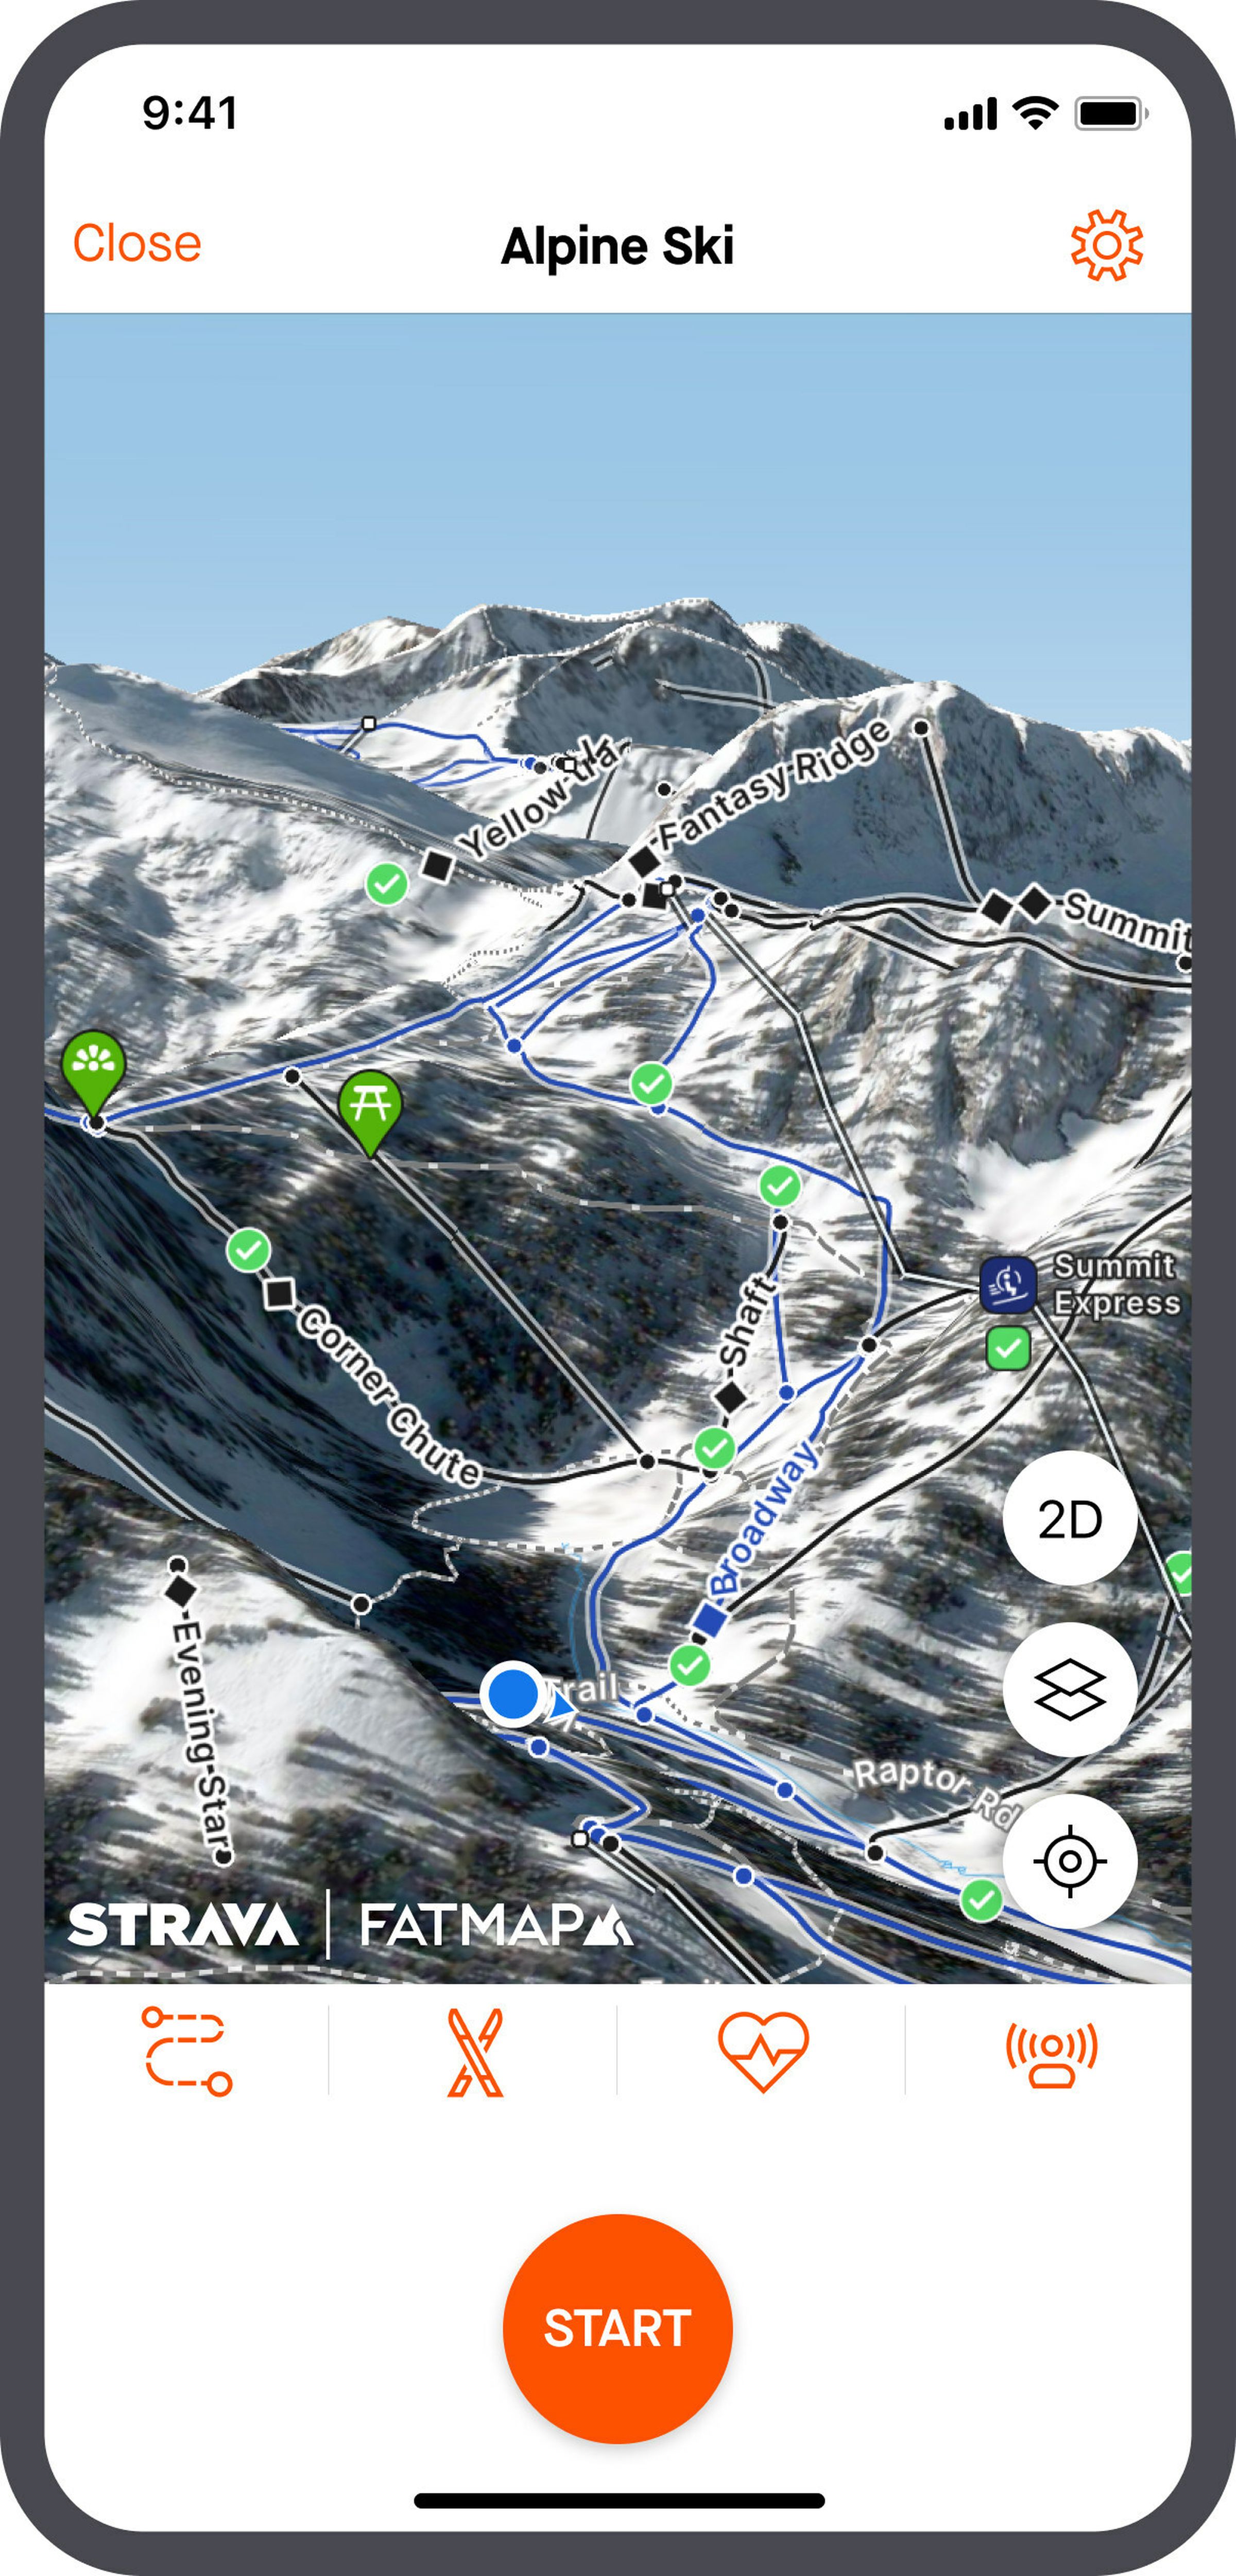 Render of a 3D Alpine ski map showing various points of interest within the Strava app.